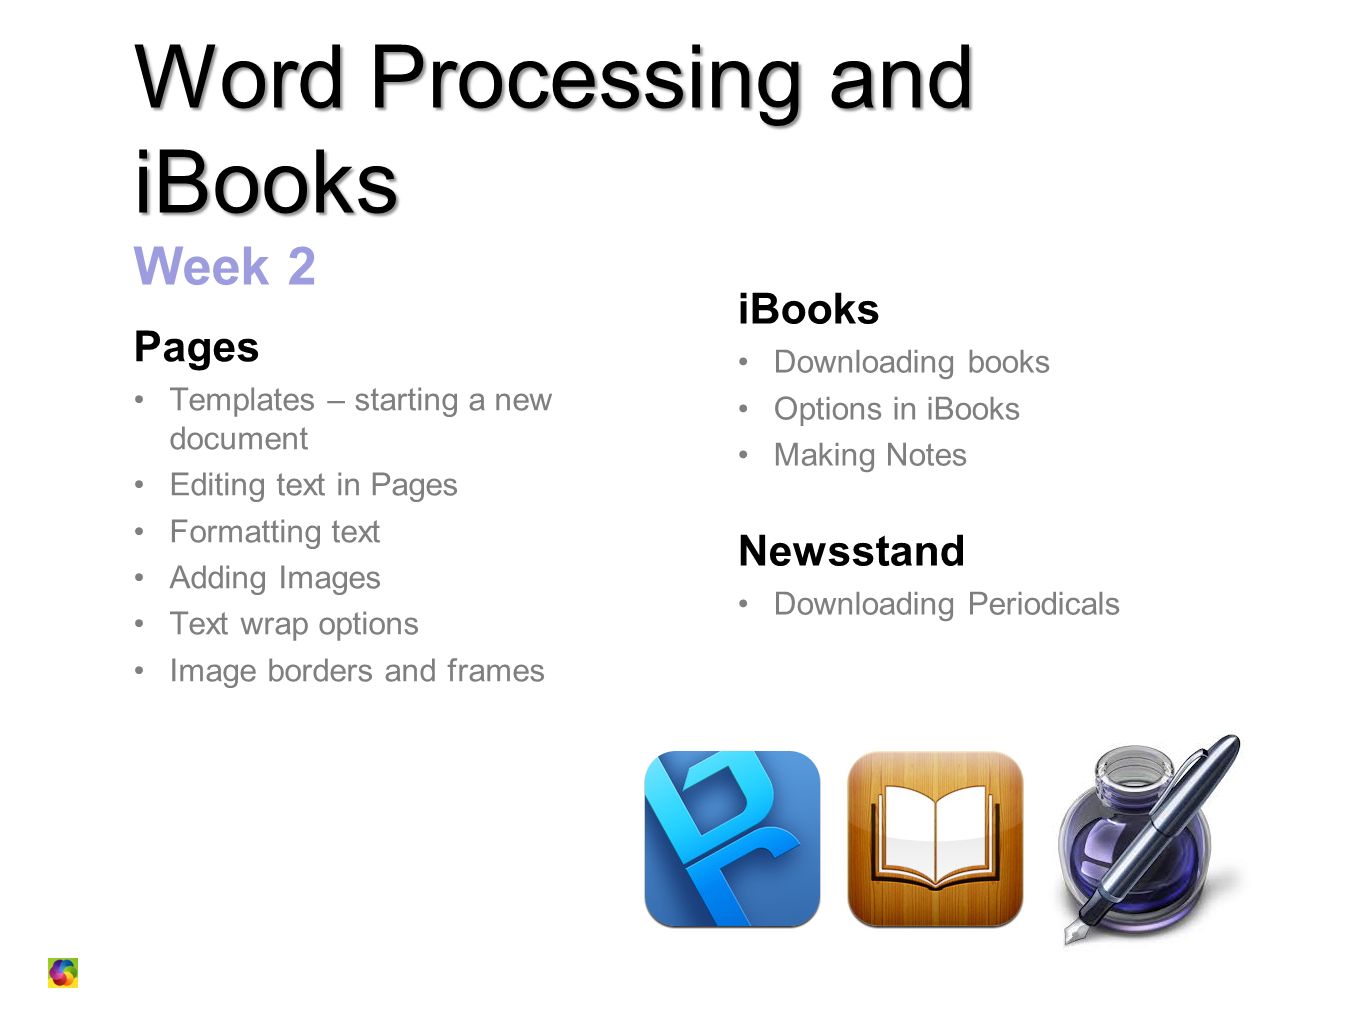 Word Processing and iBooks Word Processing and iBooks Week 2 Pages Templates – starting a new document Editing text in Pages Formatting text Adding Images Text wrap options Image borders and frames iBooks Downloading books Options in iBooks Making Notes Newsstand Downloading Periodicals